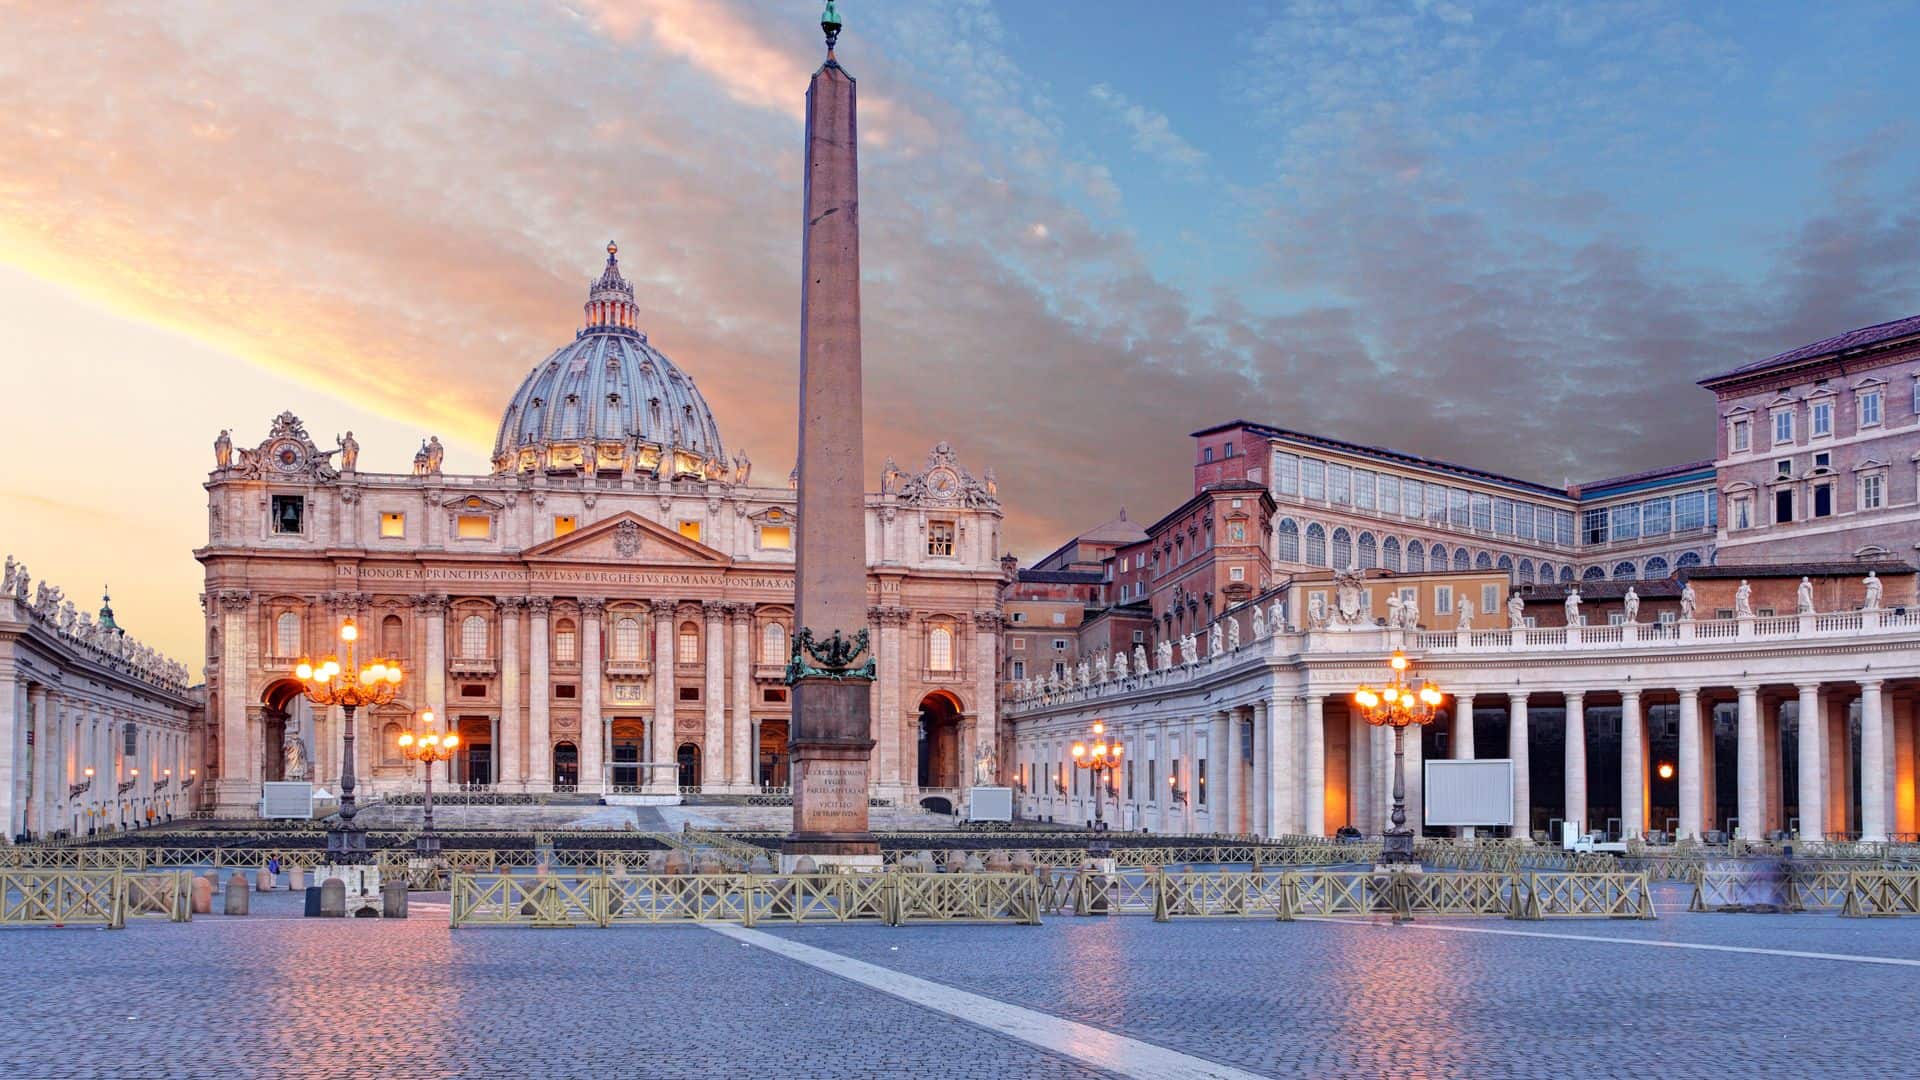 What Country Is St. Peter's Basilica In